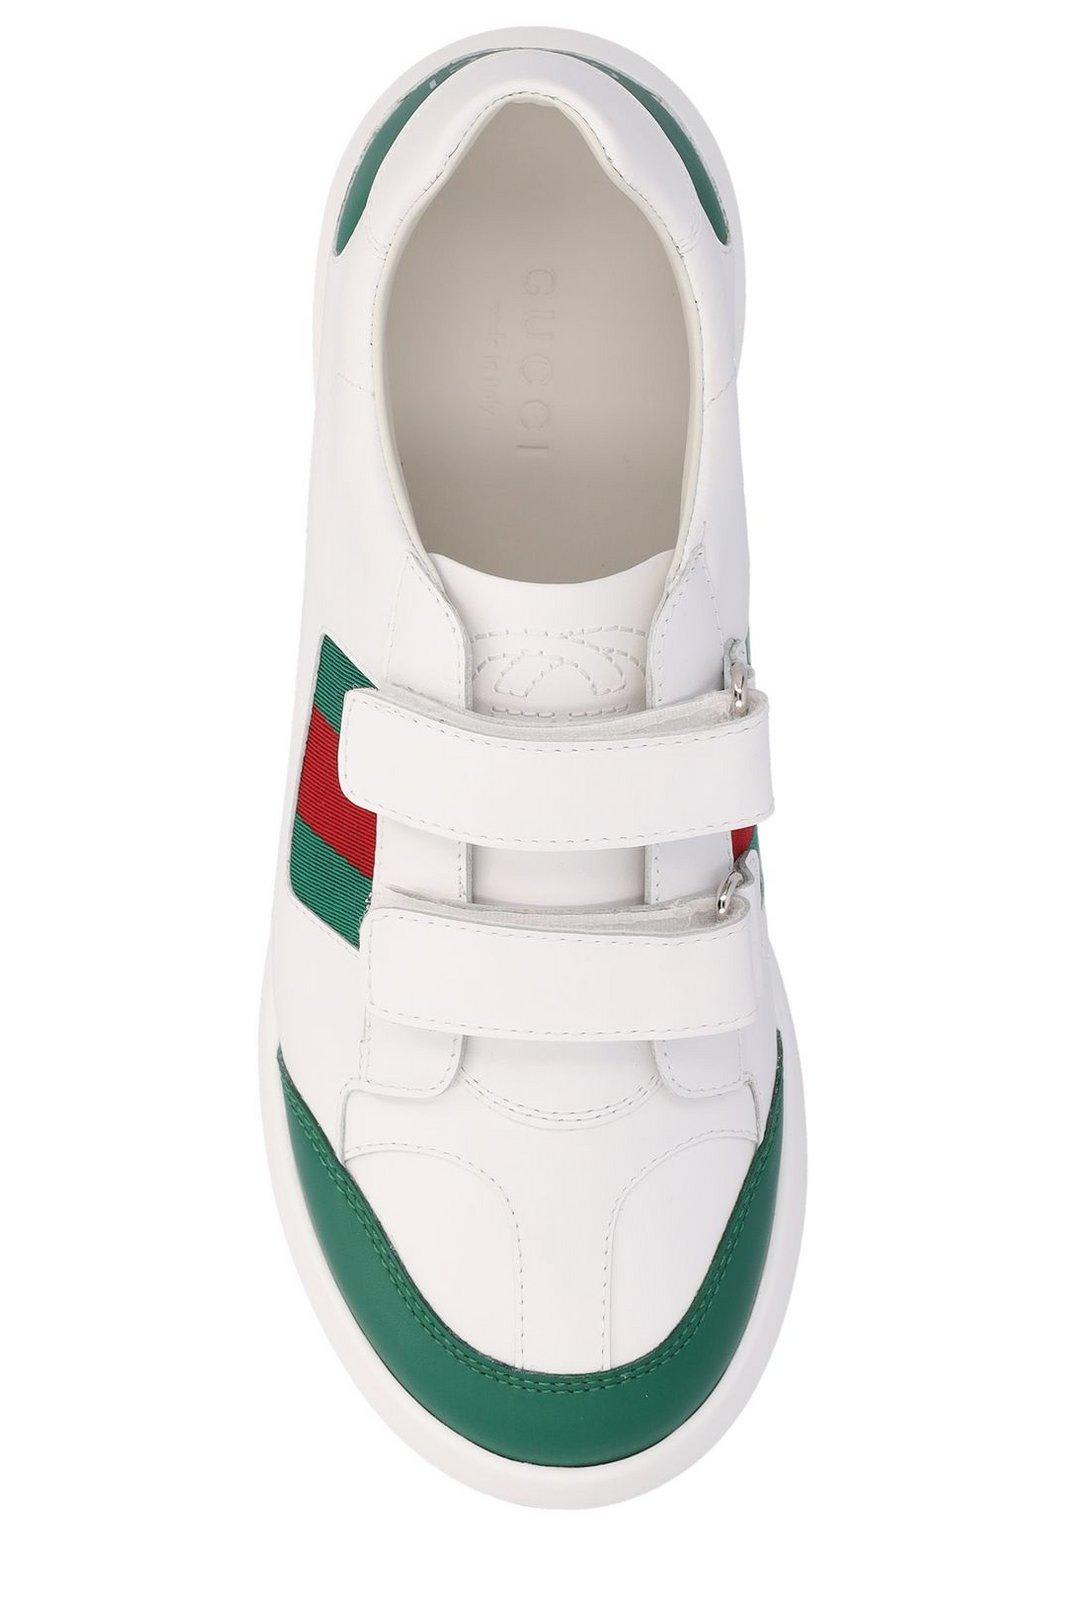 Shop Gucci Logo Printed Round Toe Sneakers